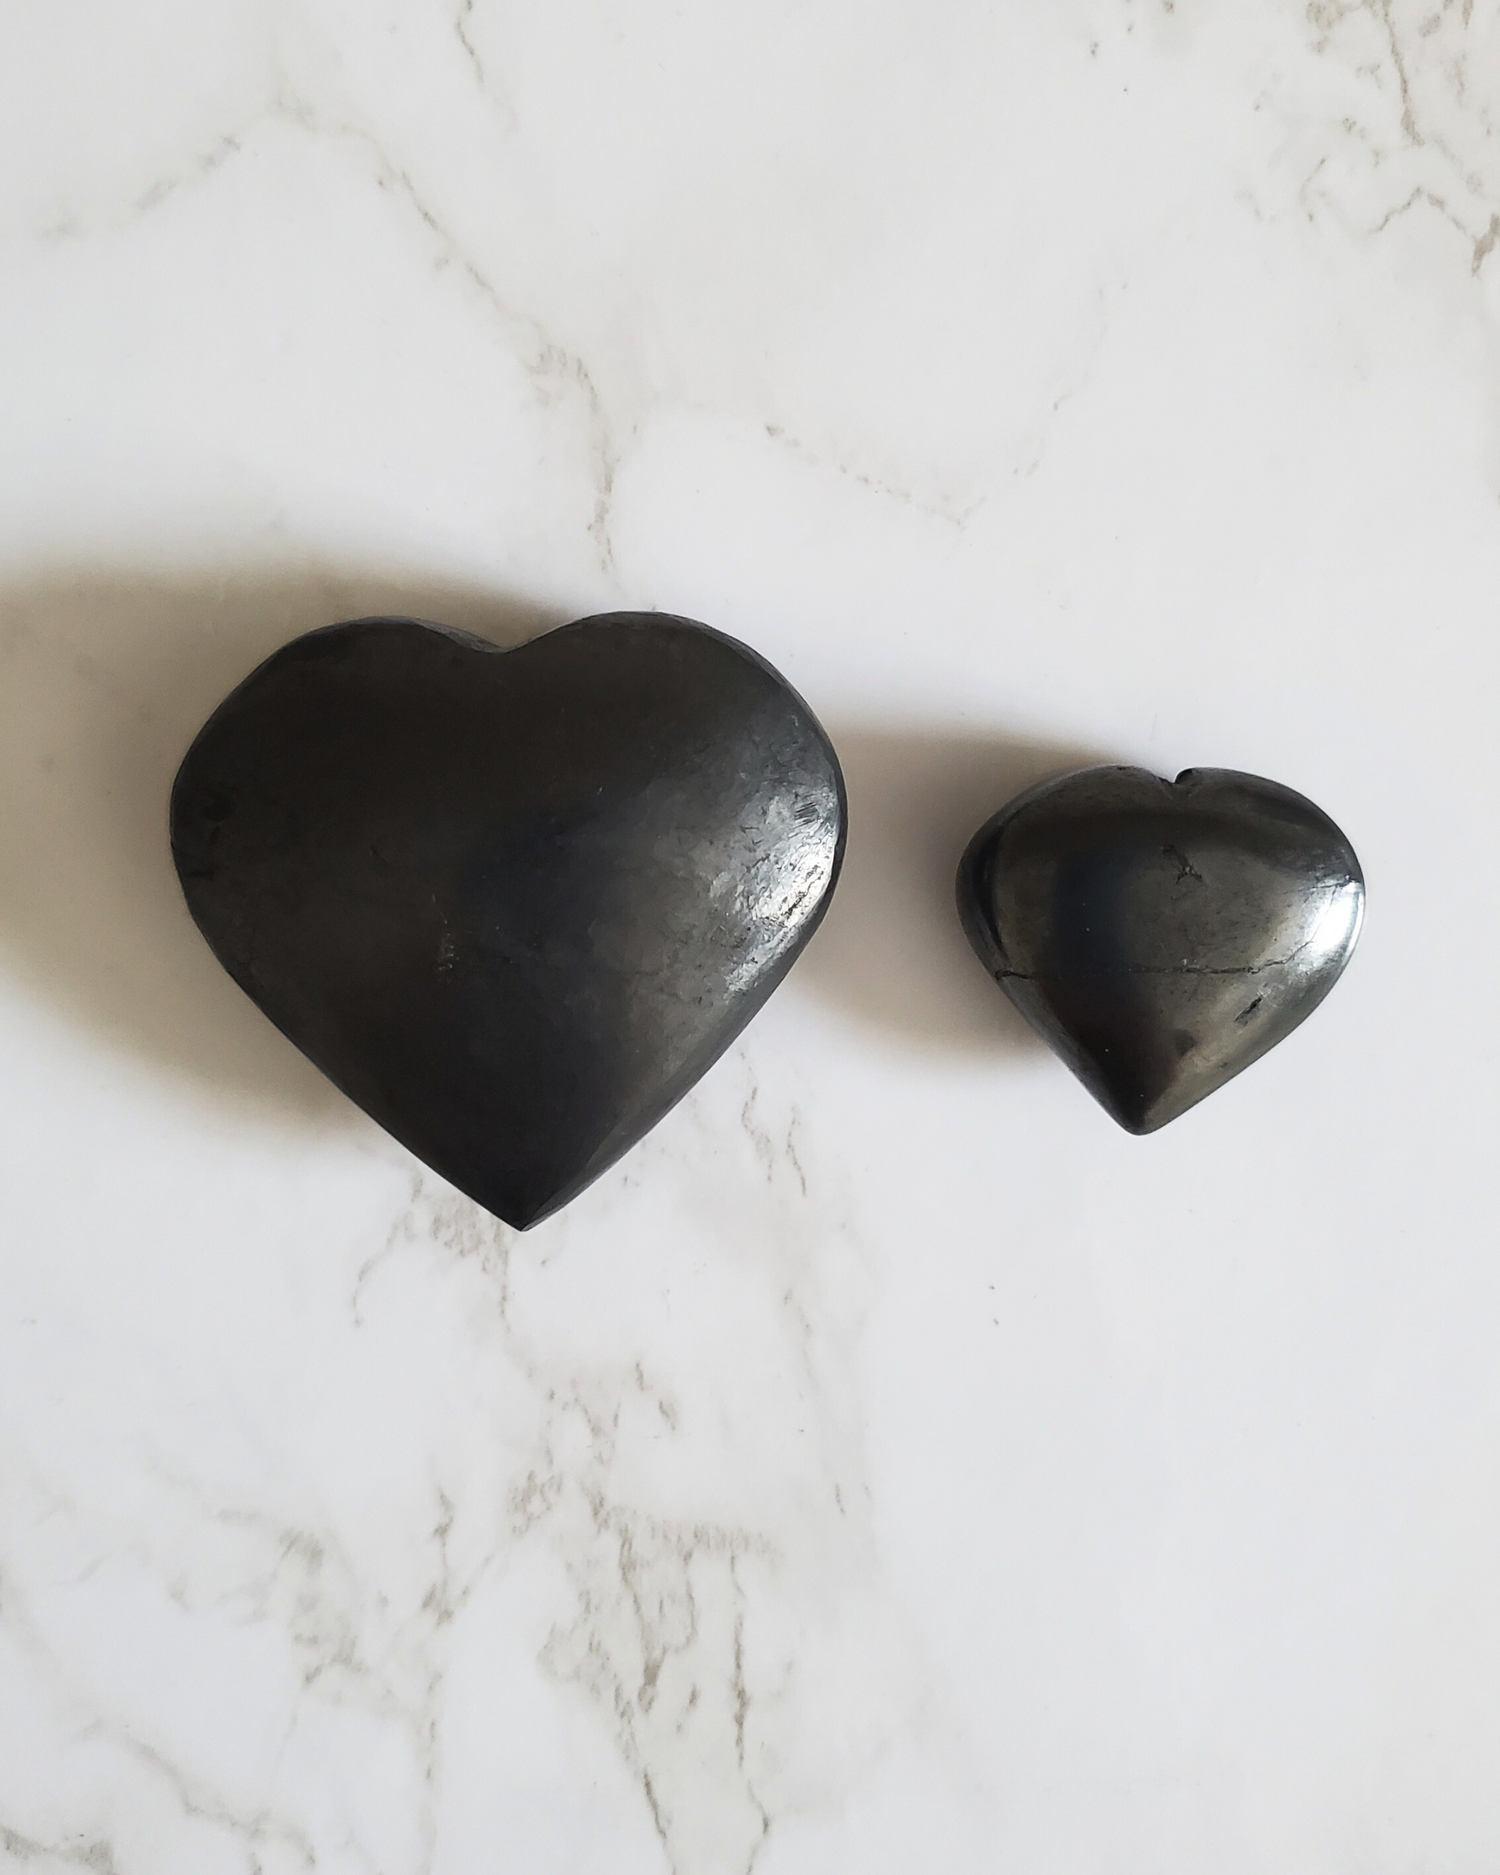 Natural Pain Relief and Protection from 5G and EMFs Shungite Hearts 2 sizes